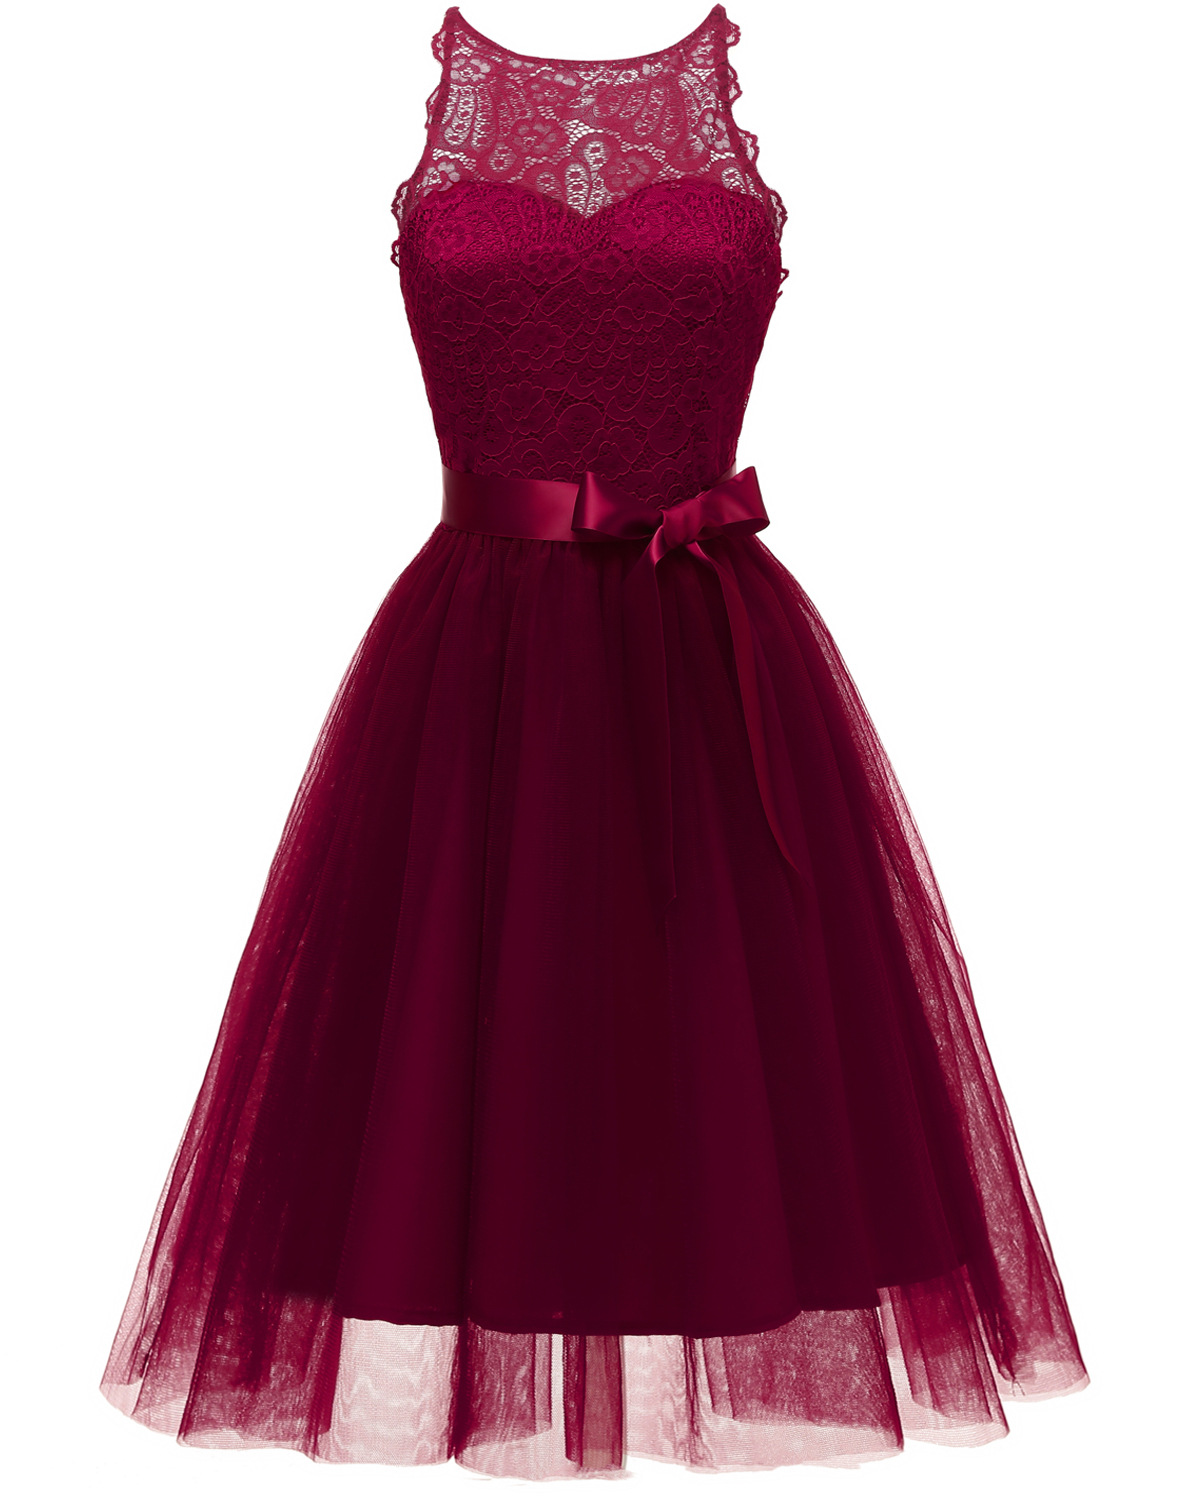 Princess Style A Line Halter Neck Sleeveless Hollow Lace Floral Bridesmaid Wedding Dress - Wine Red